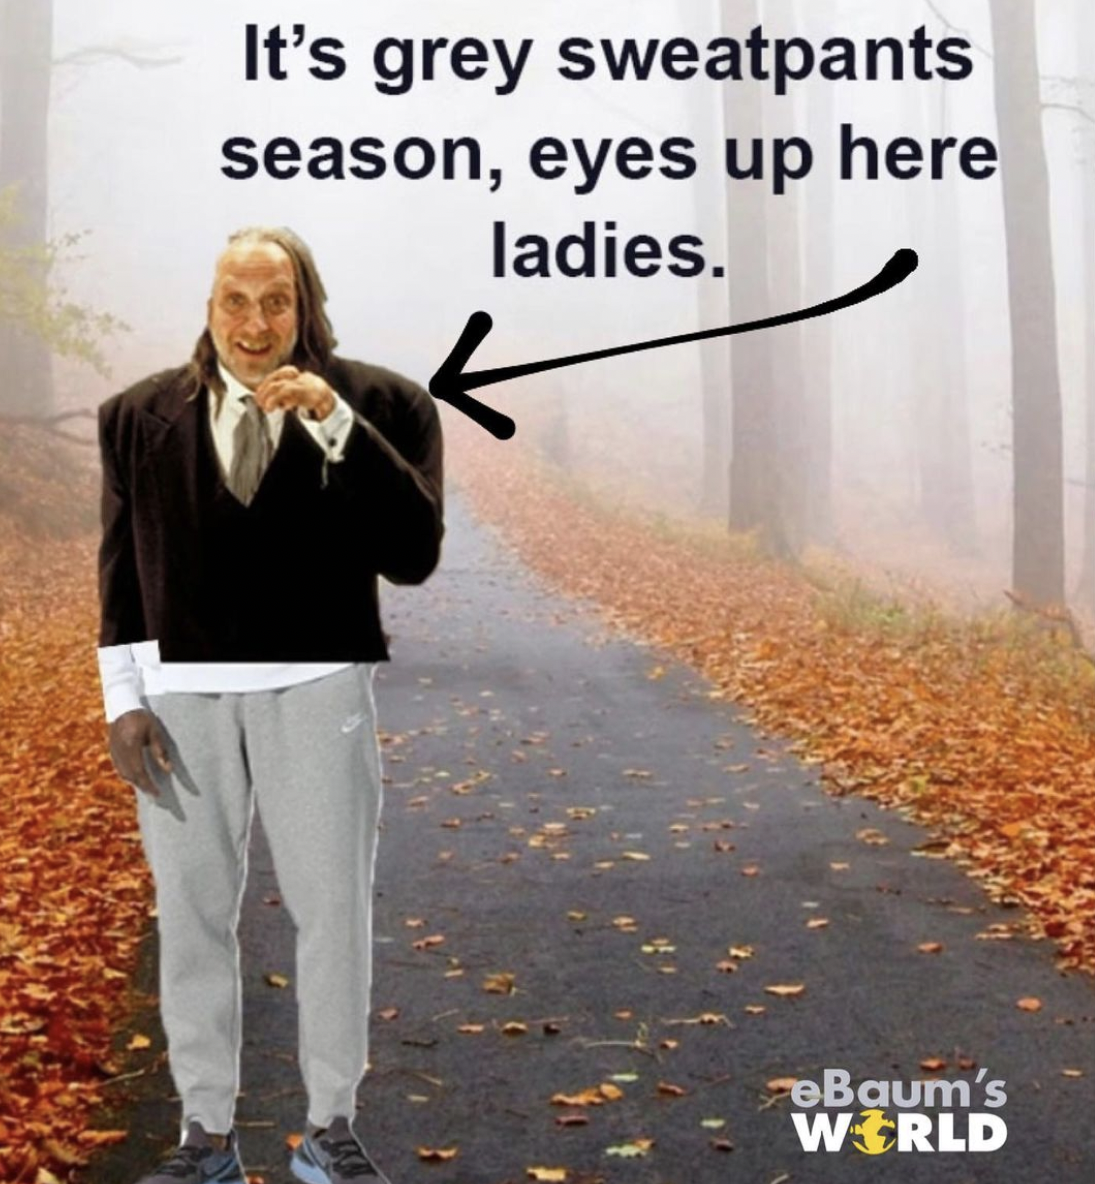 scary movie 2 strong hand - It's grey sweatpants season, eyes up here ladies. Baum's World